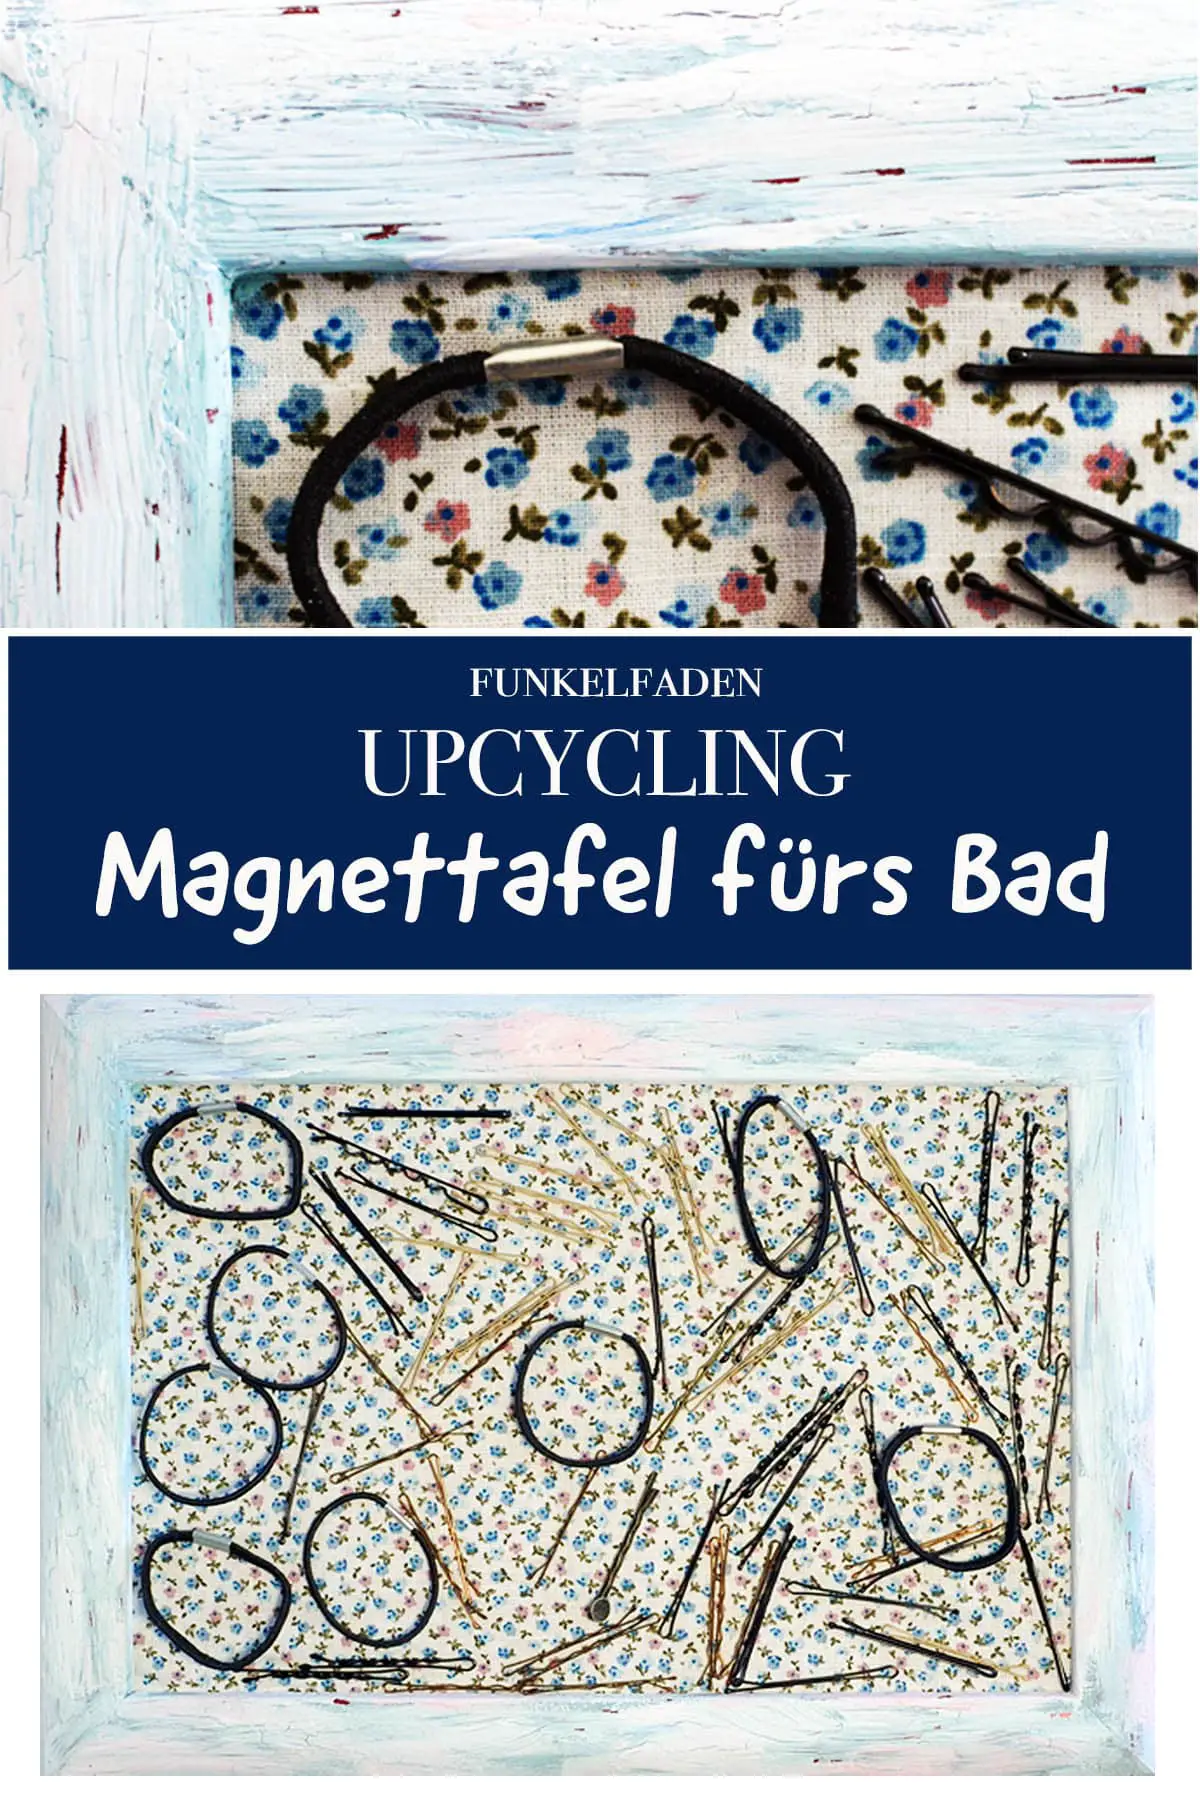 Upcycling Magnettafel ins Bad